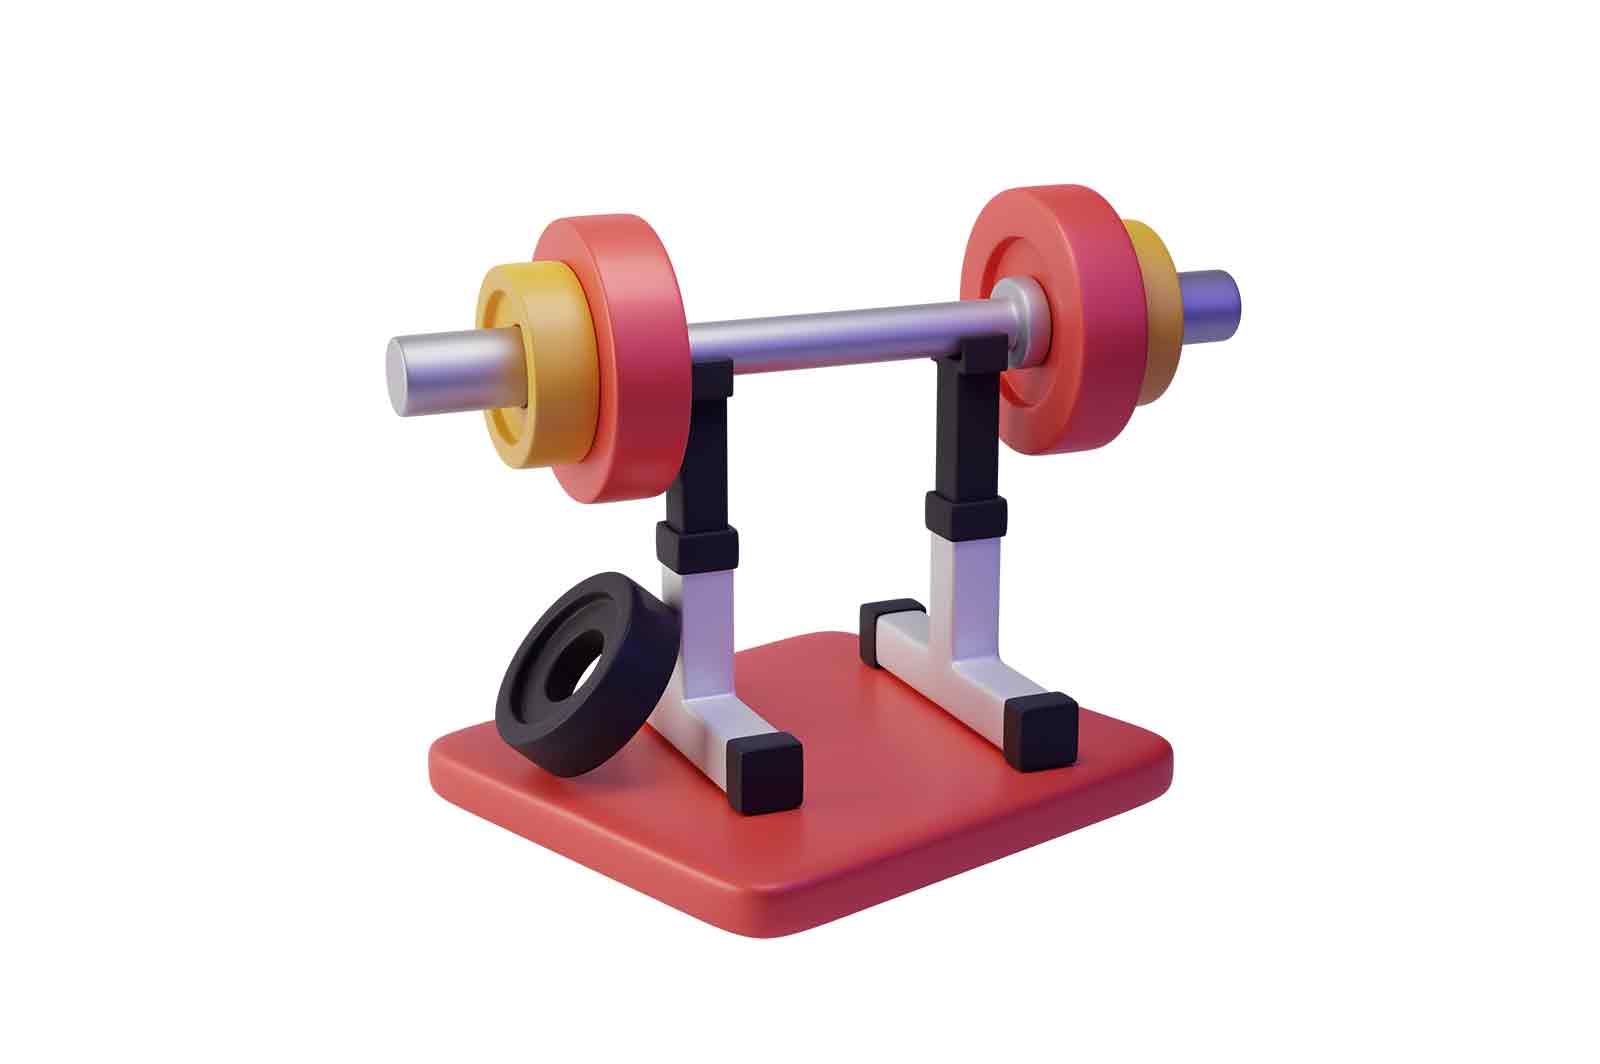 Dumbbell on metal rack 3d rendered illustration. Sport barbell on stand for exercise in gym. Sports workout equipment